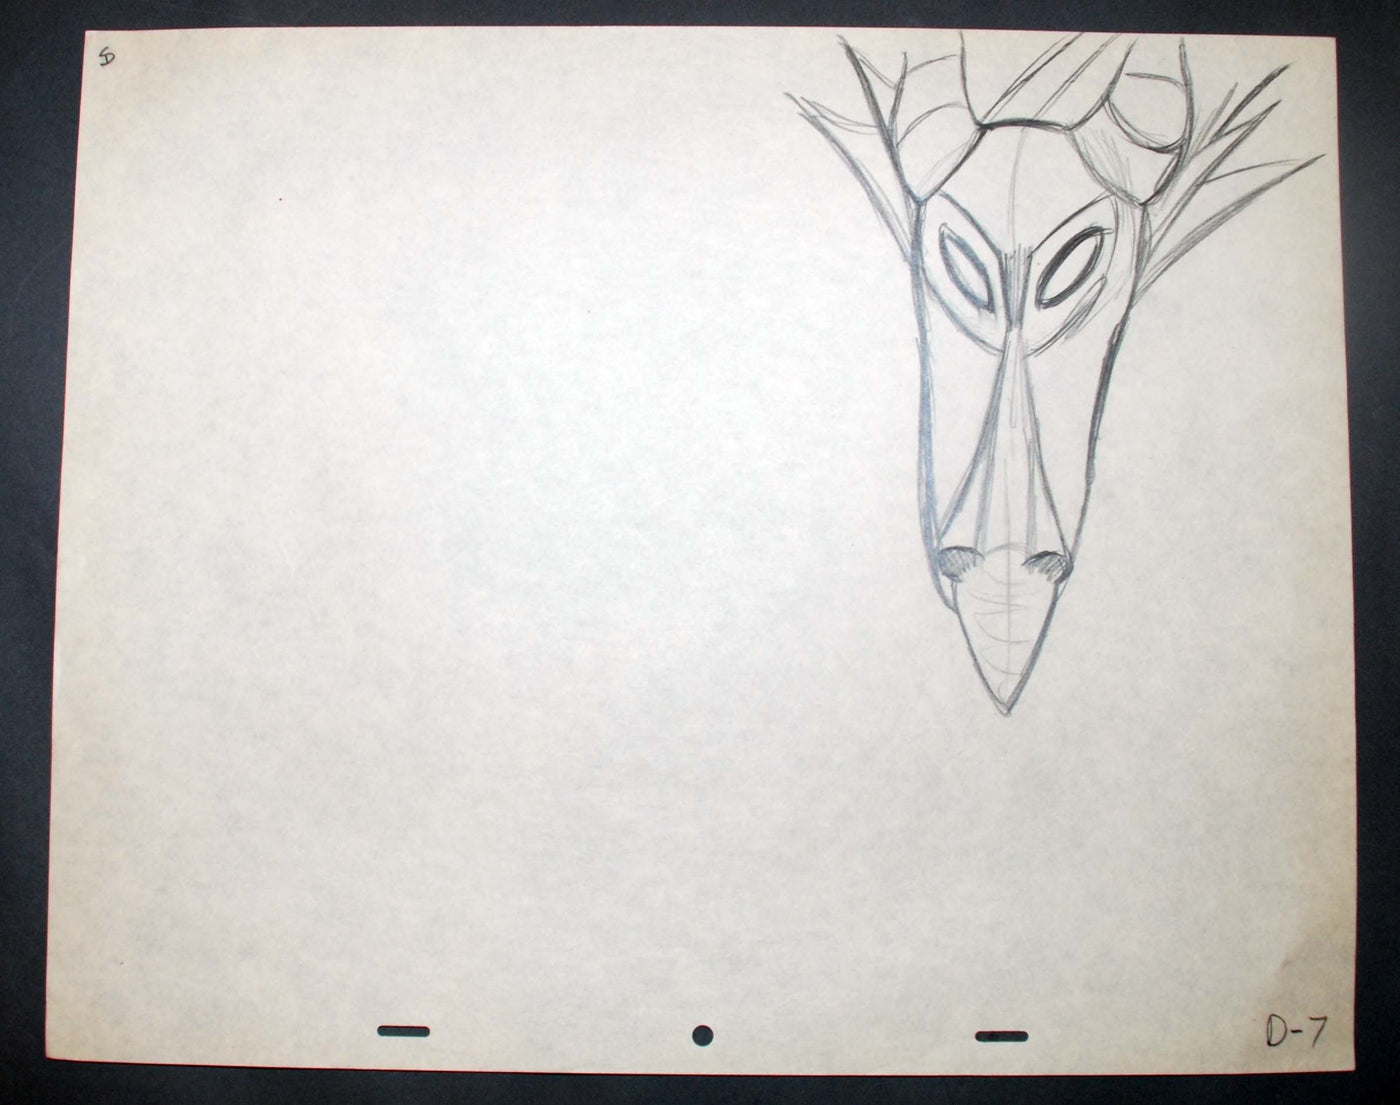 Original Walt Disney Production Drawing from Sleeping Beauty featuring Dragon Maleficent